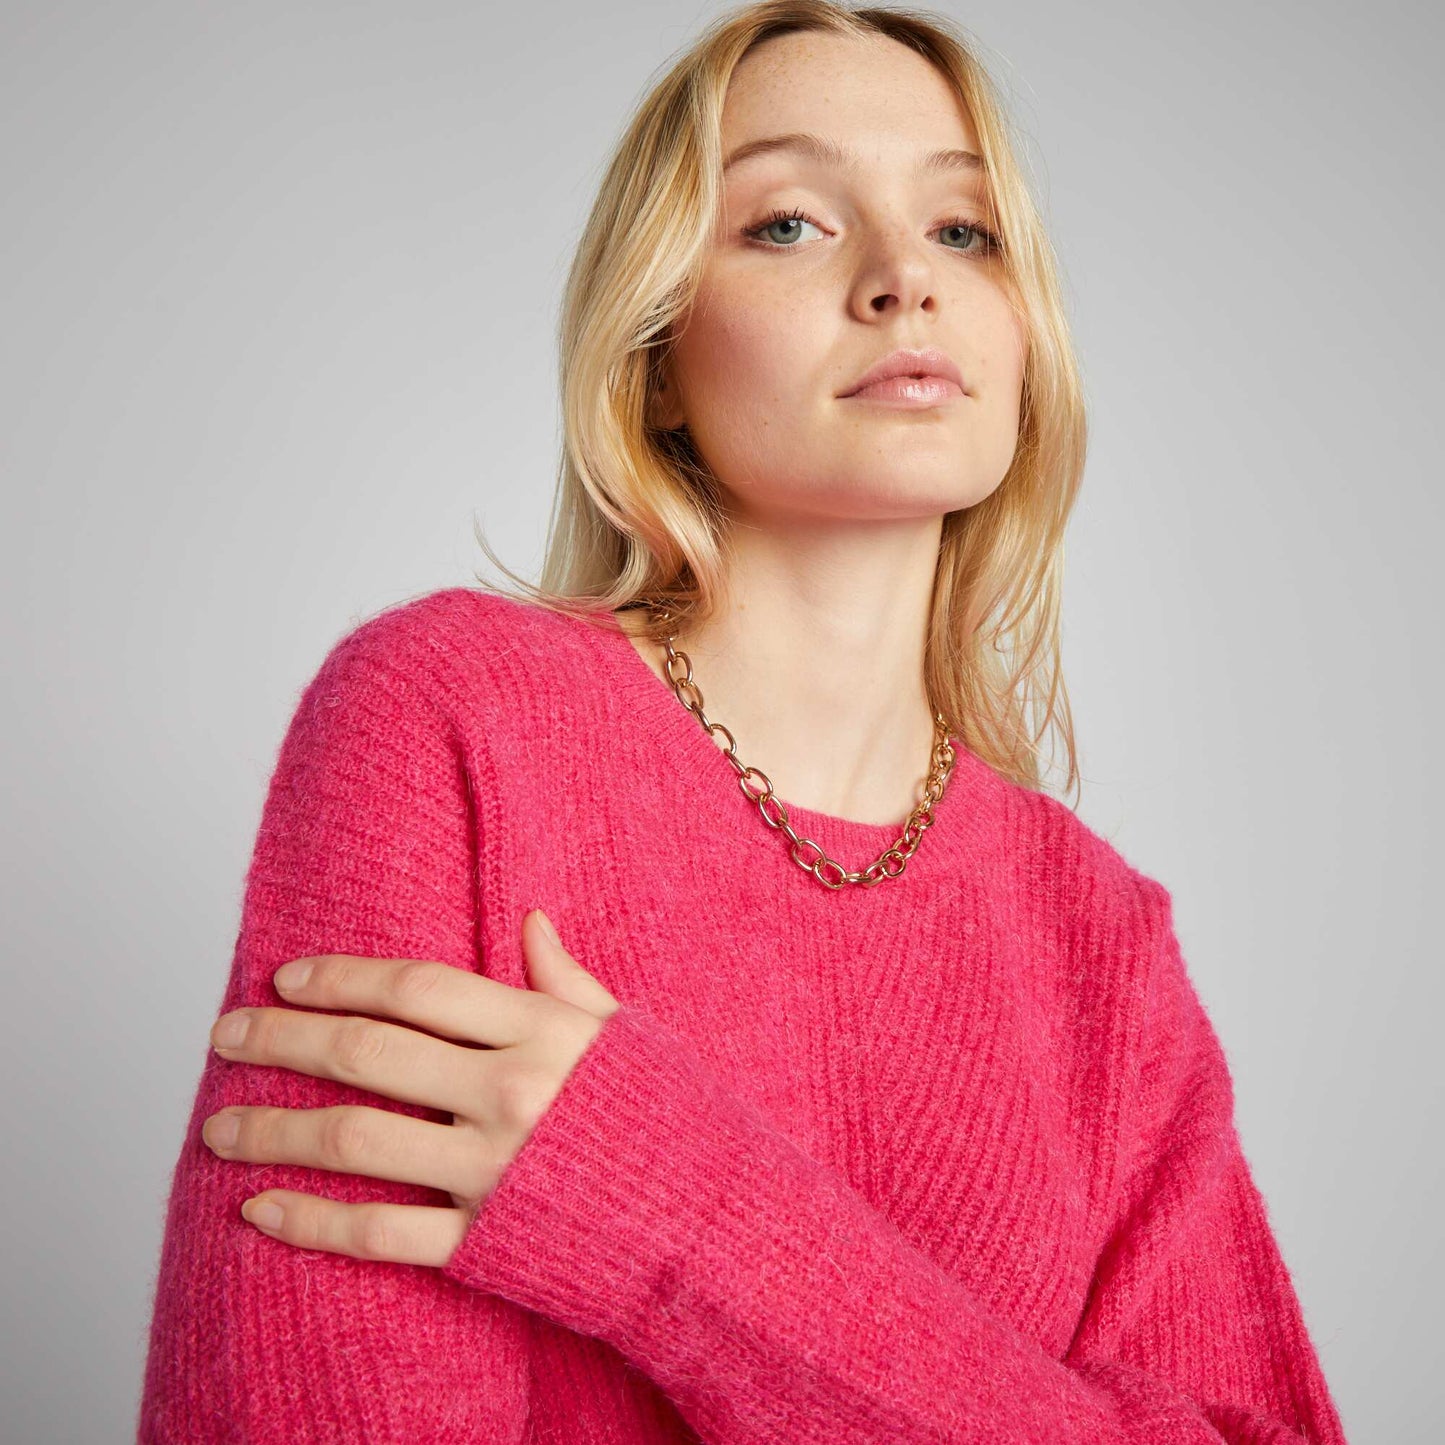 Soft ribbed knit sweater PINK